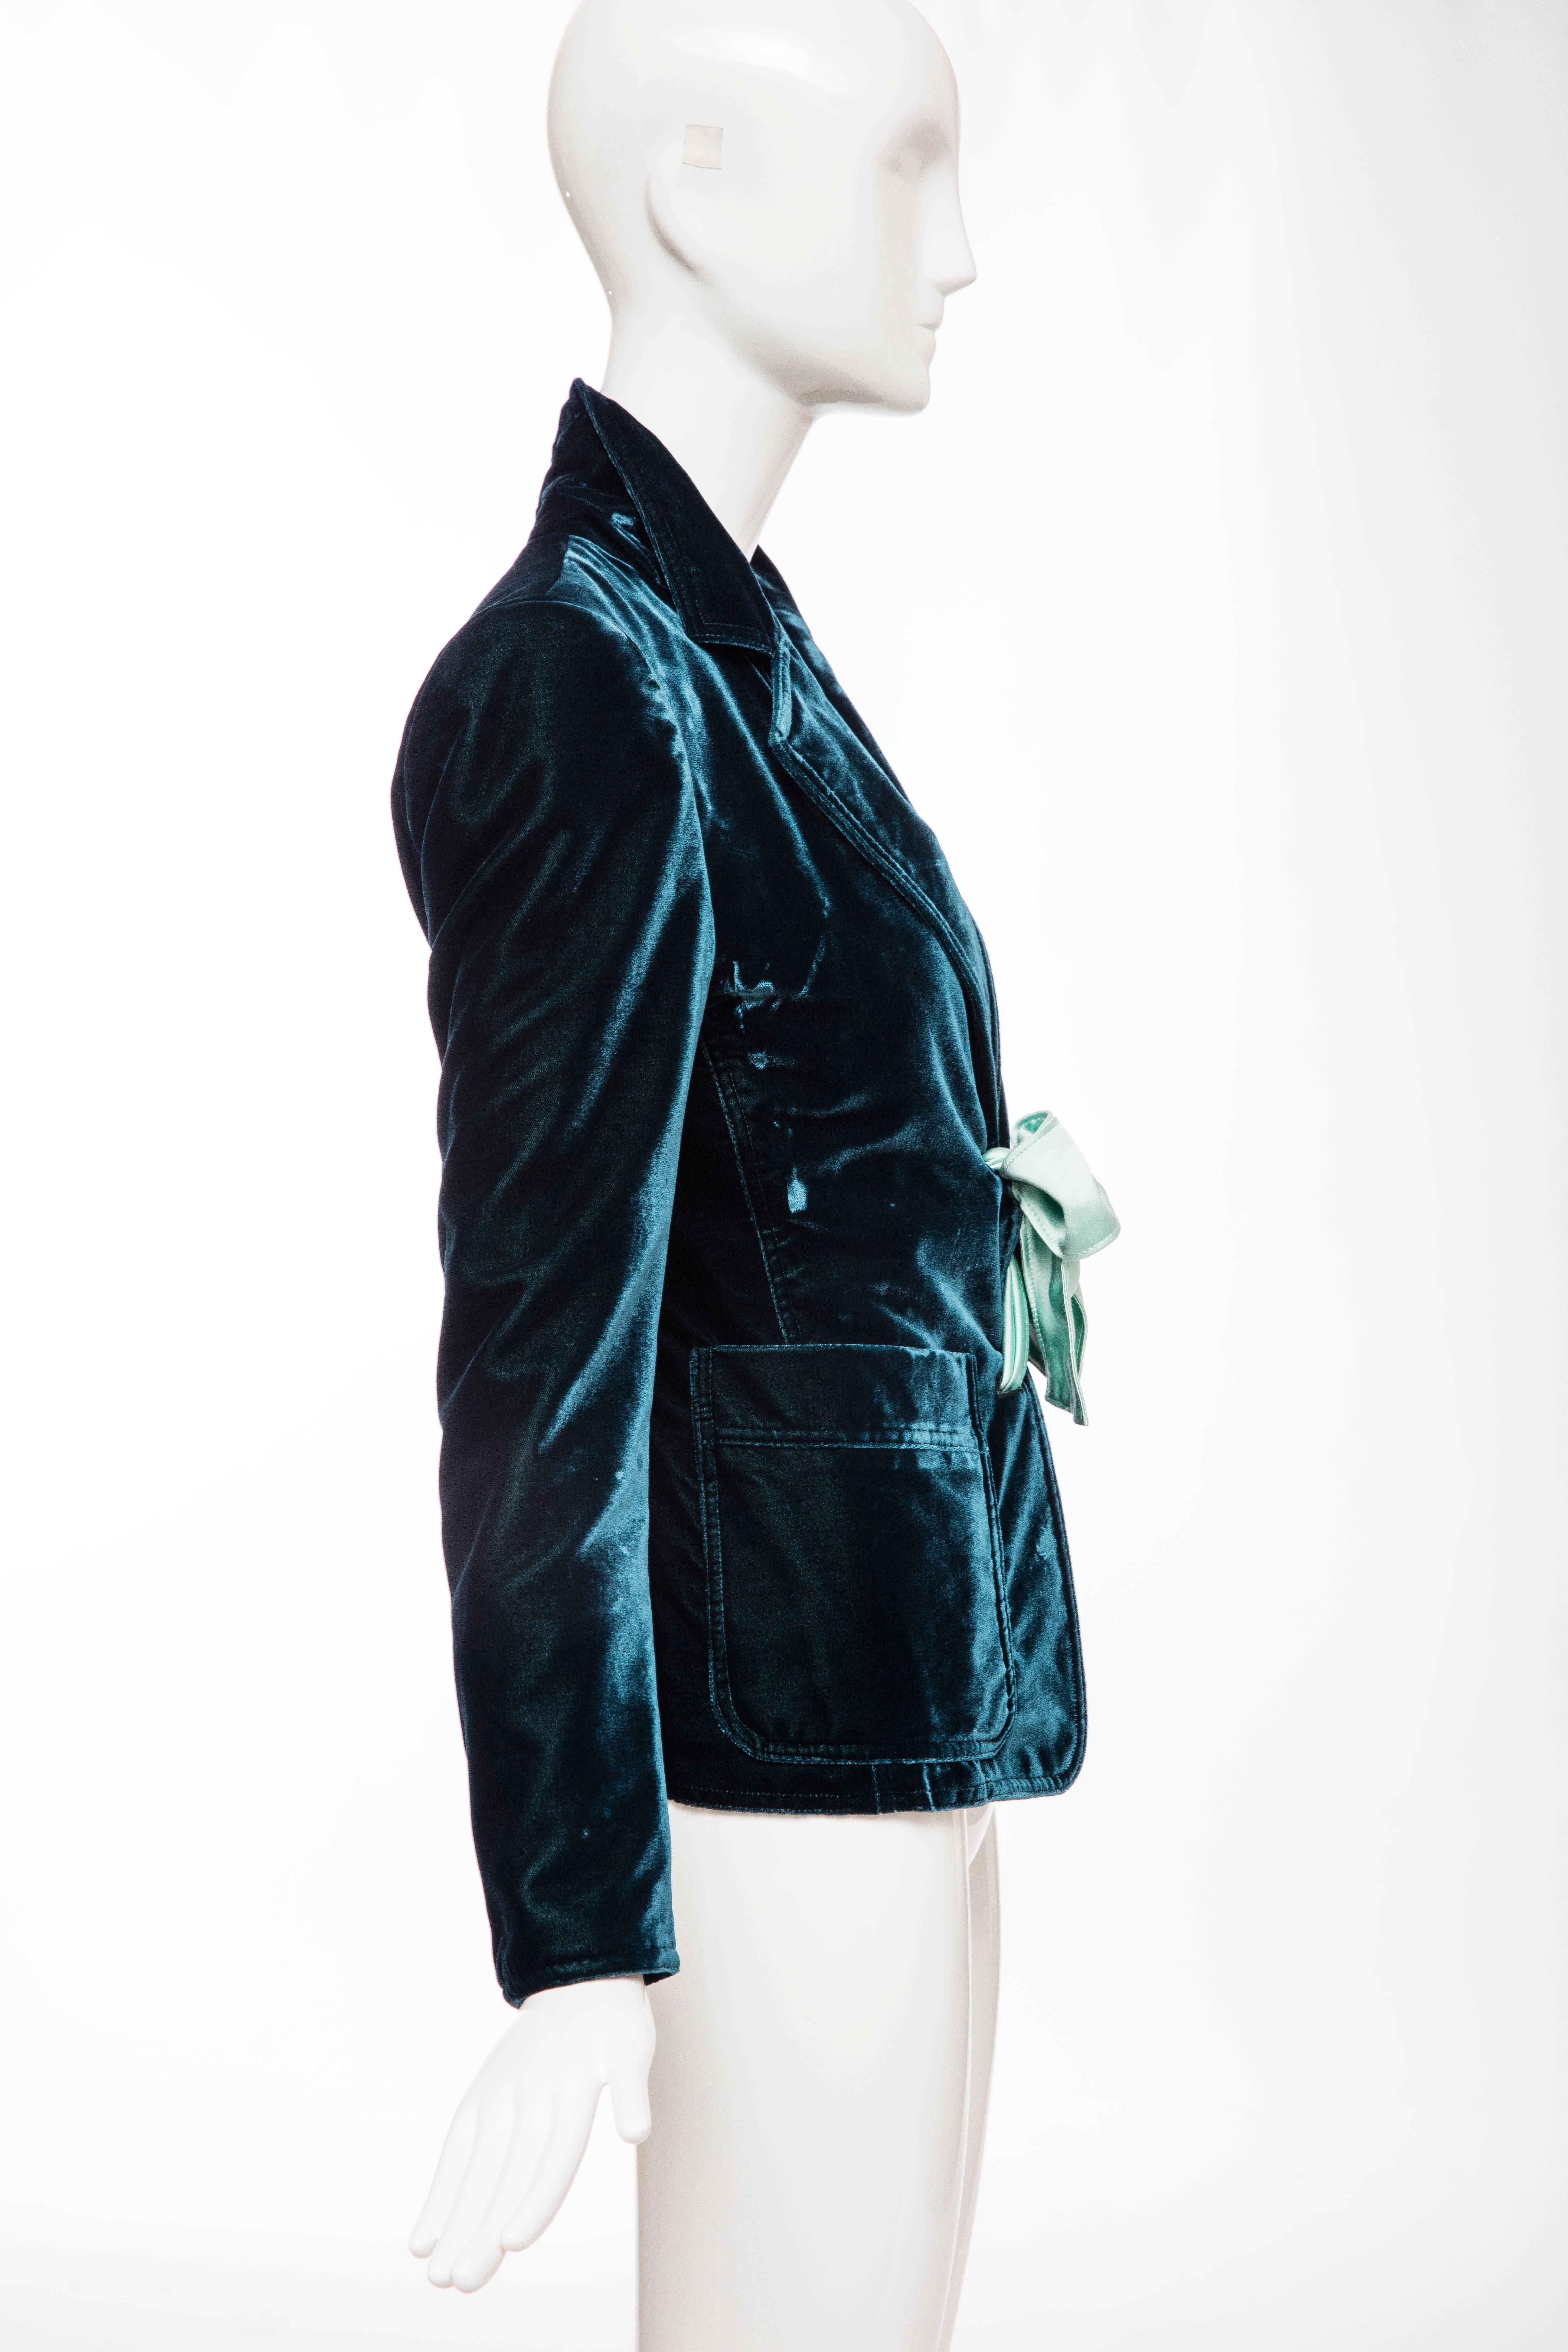 Tom Ford for Yves Saint Laurent, Autumn-Winter 2003, emerald green silk velvet, long sleeve blazer with notched lapels, dual front patch pockets and silk satin sash-tie closure at waist.

FR. 34
US. 2

Bust 30, Waist 24.5, Hips 26, Length 24